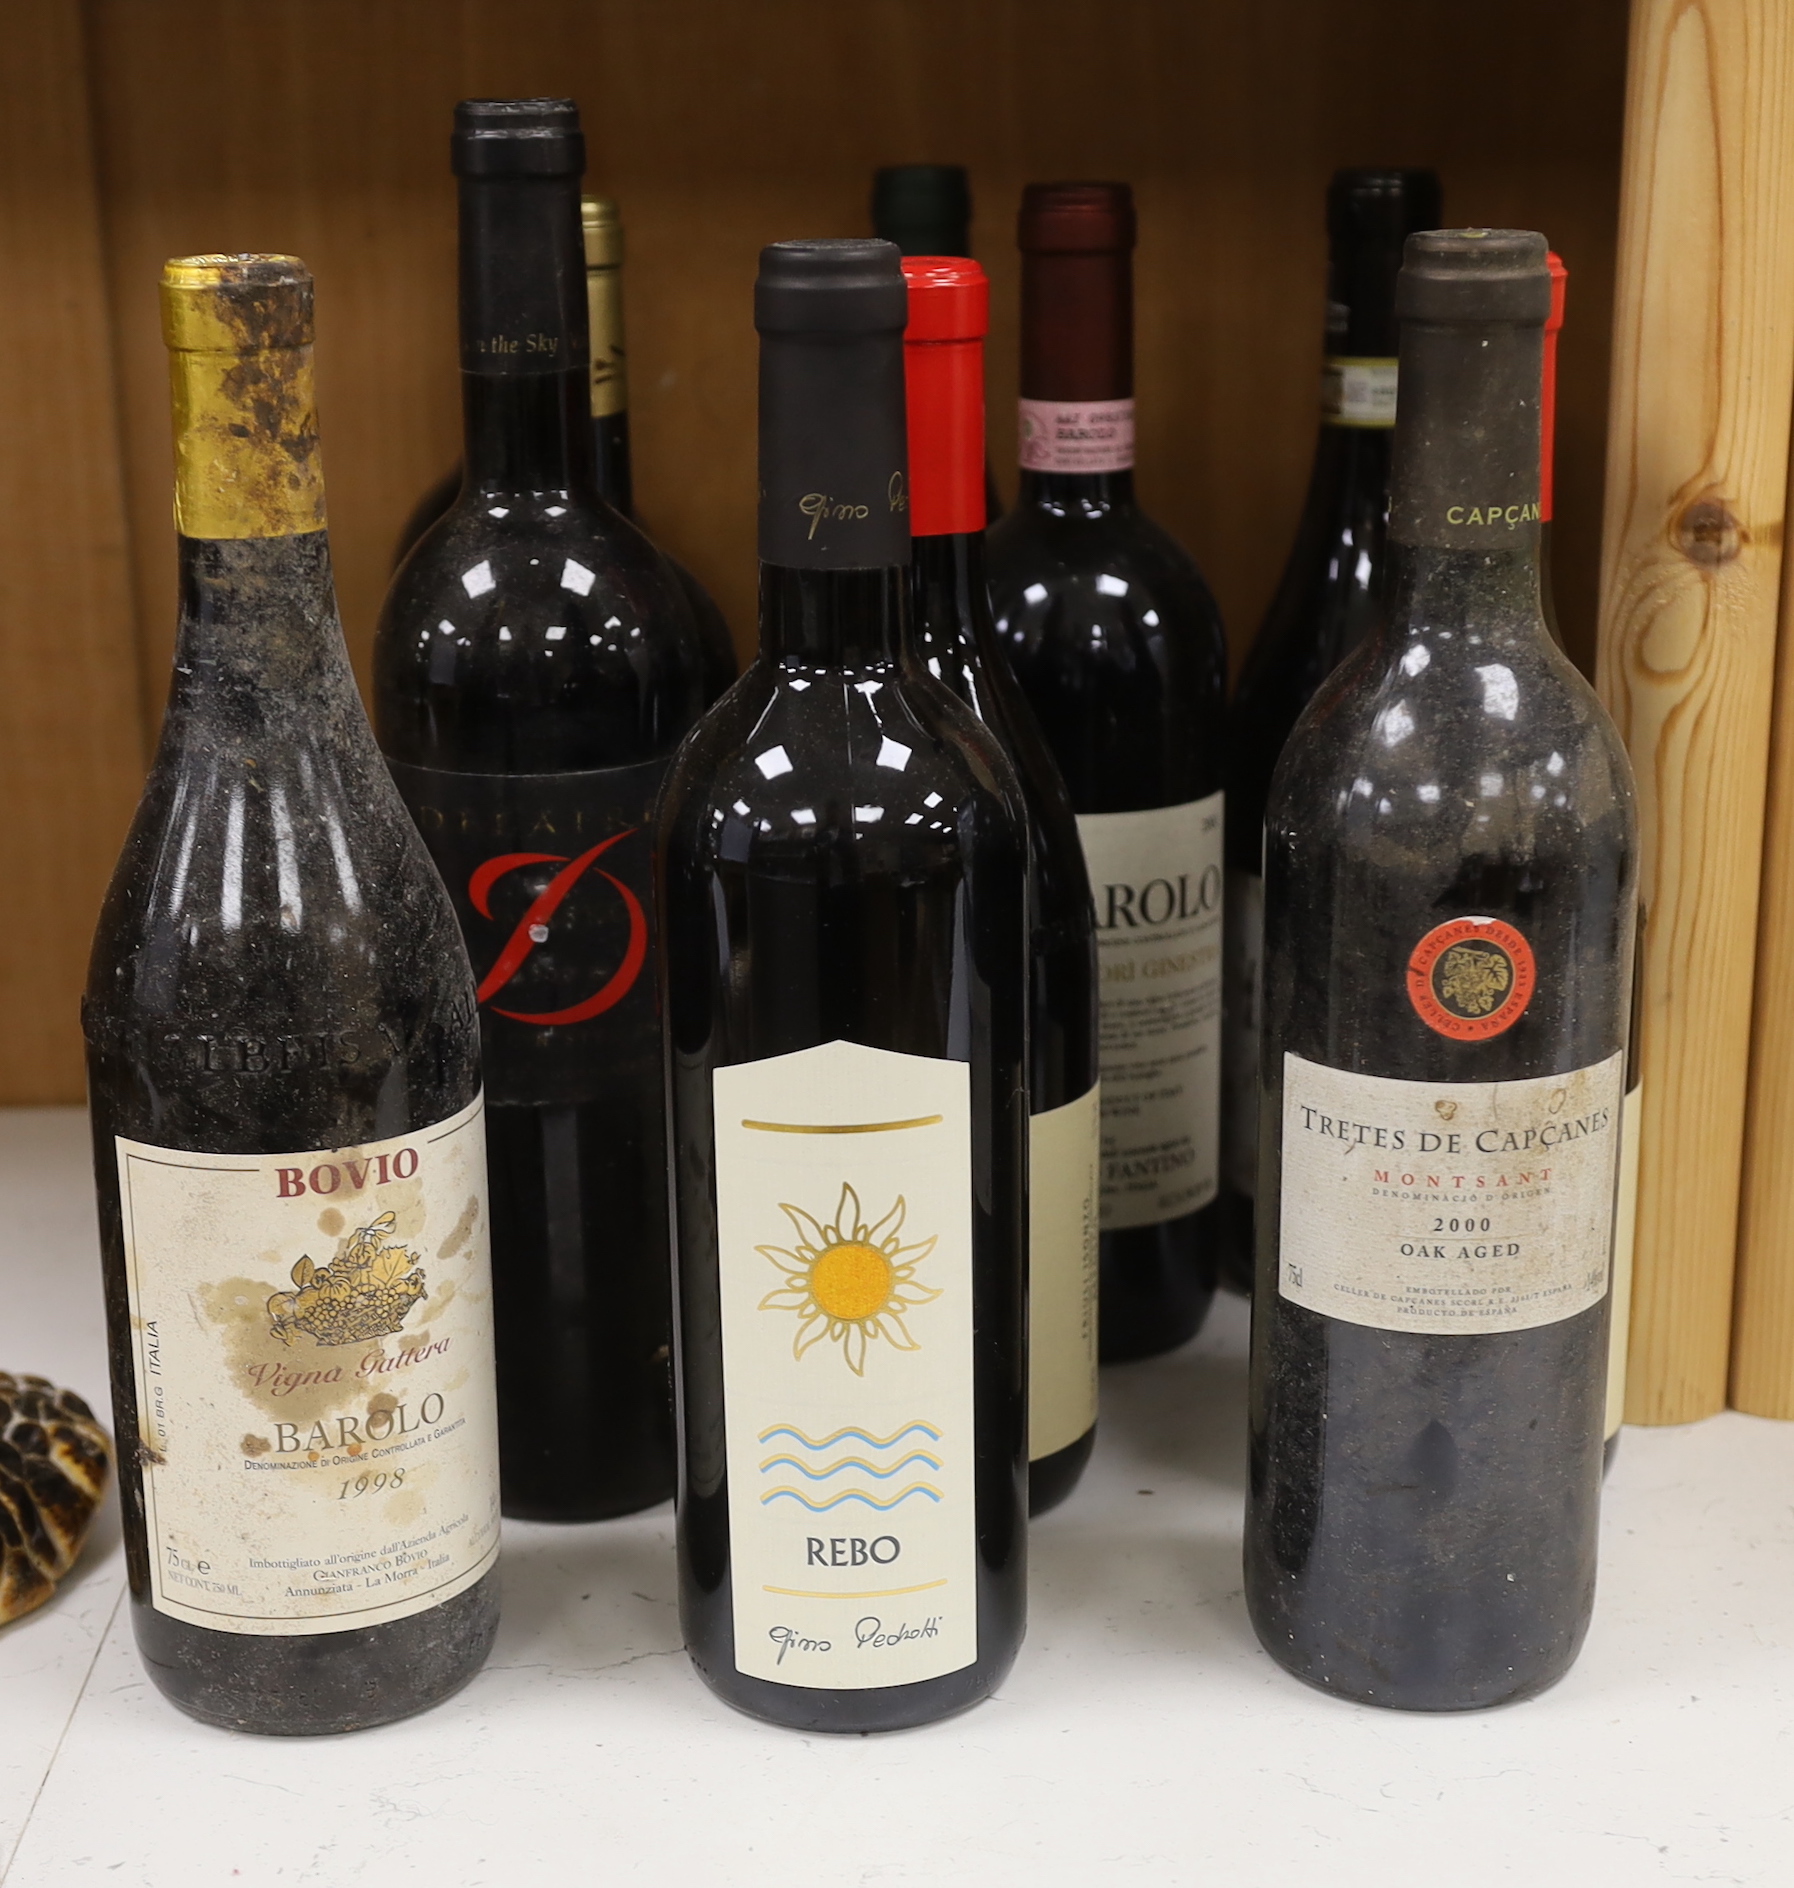 Eleven bottles of various wines to include a bottle of Tretes de Capcanes oak aged 2000 wine, a bottle of Barolo 1998 and nine other assorted wines